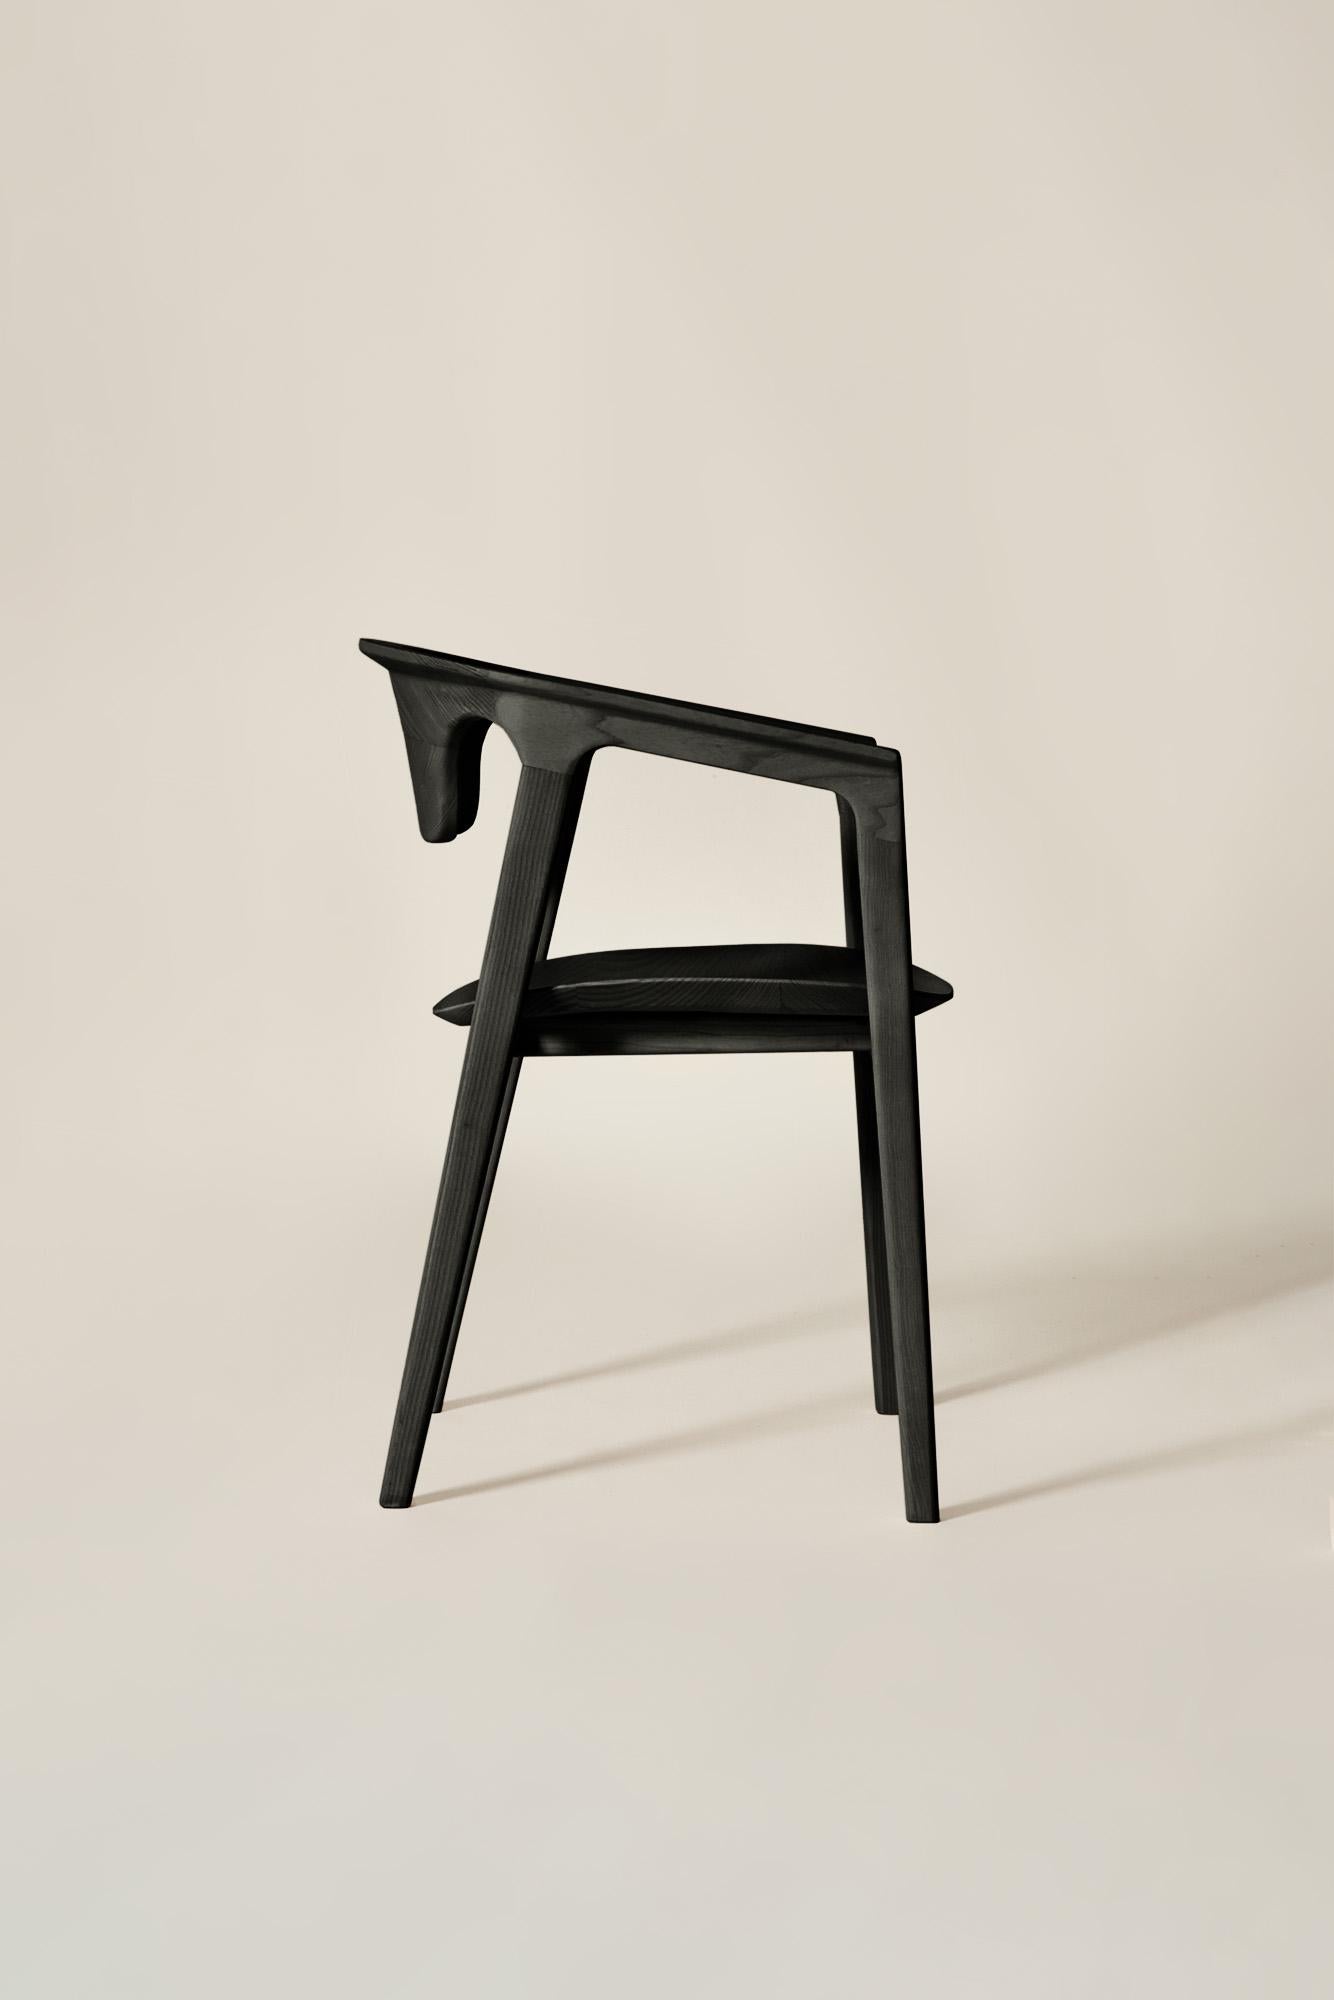 Modern Duna Solid Wood Chair, Ash in Handmade Black Finish, Contemporary For Sale